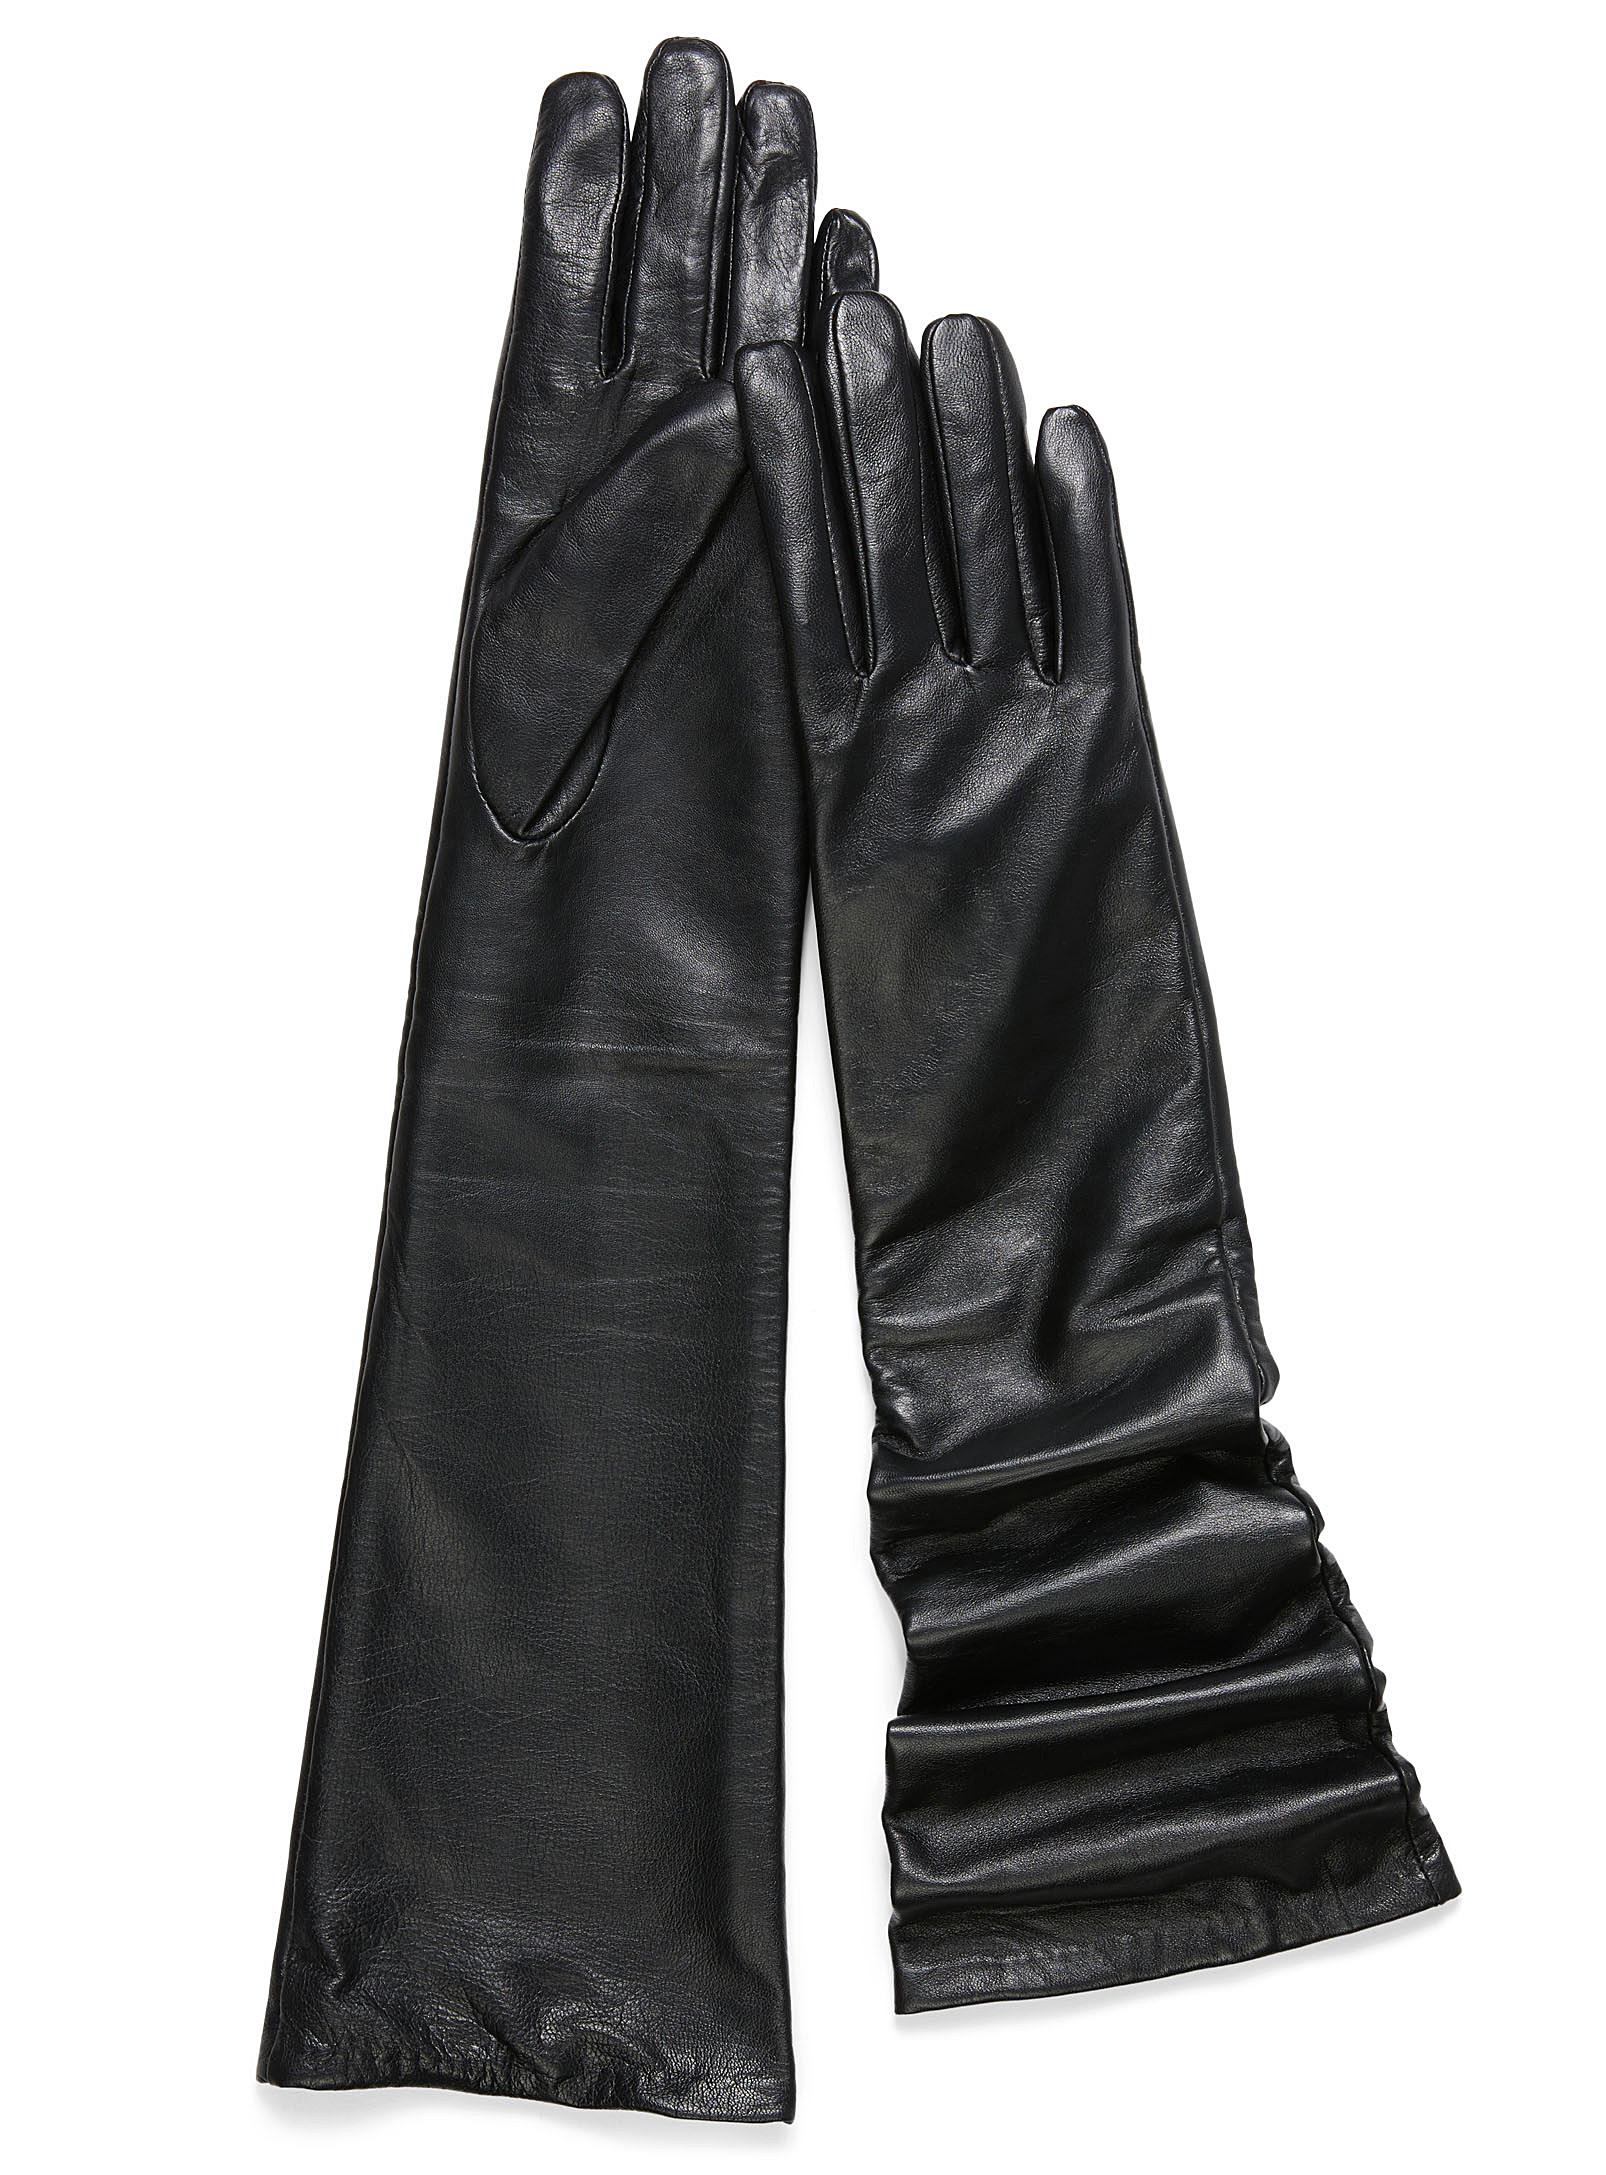 Halifax Seed Company - Electra Women's Water Resistant Gloves